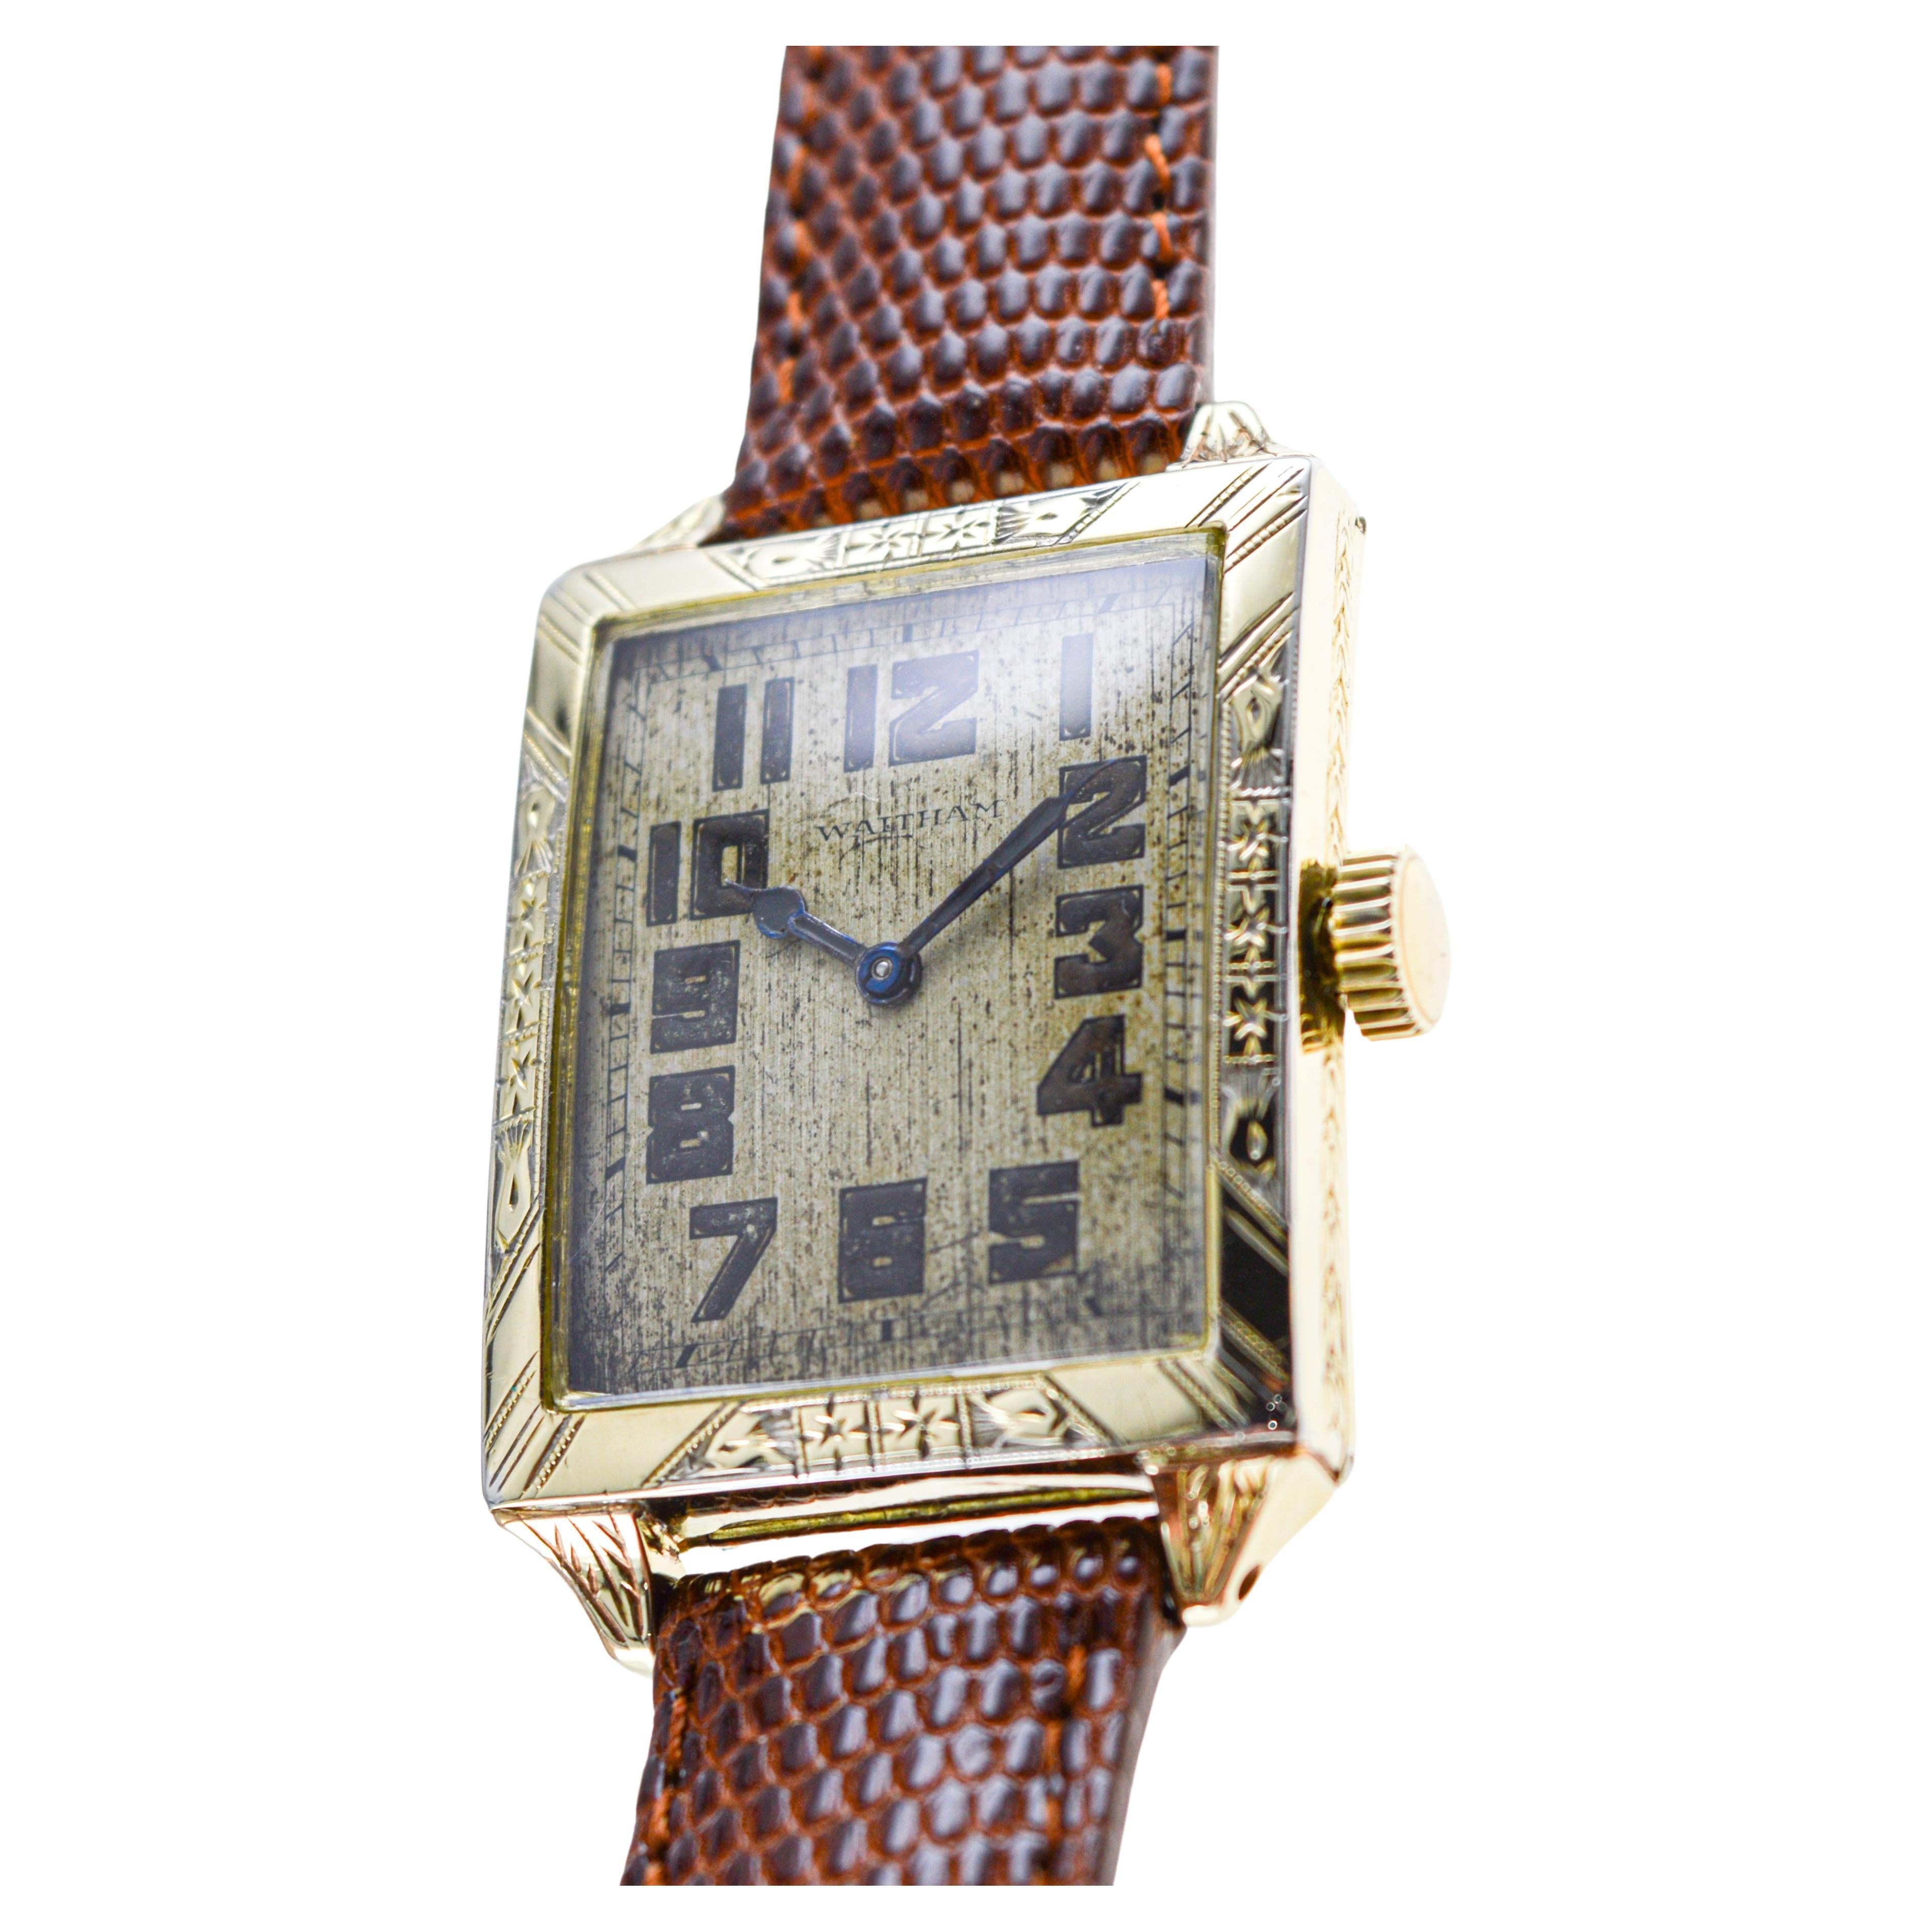 Waltham Yellow Gold Filled Art Deco Watch with Original Dial from 1926 For Sale 10